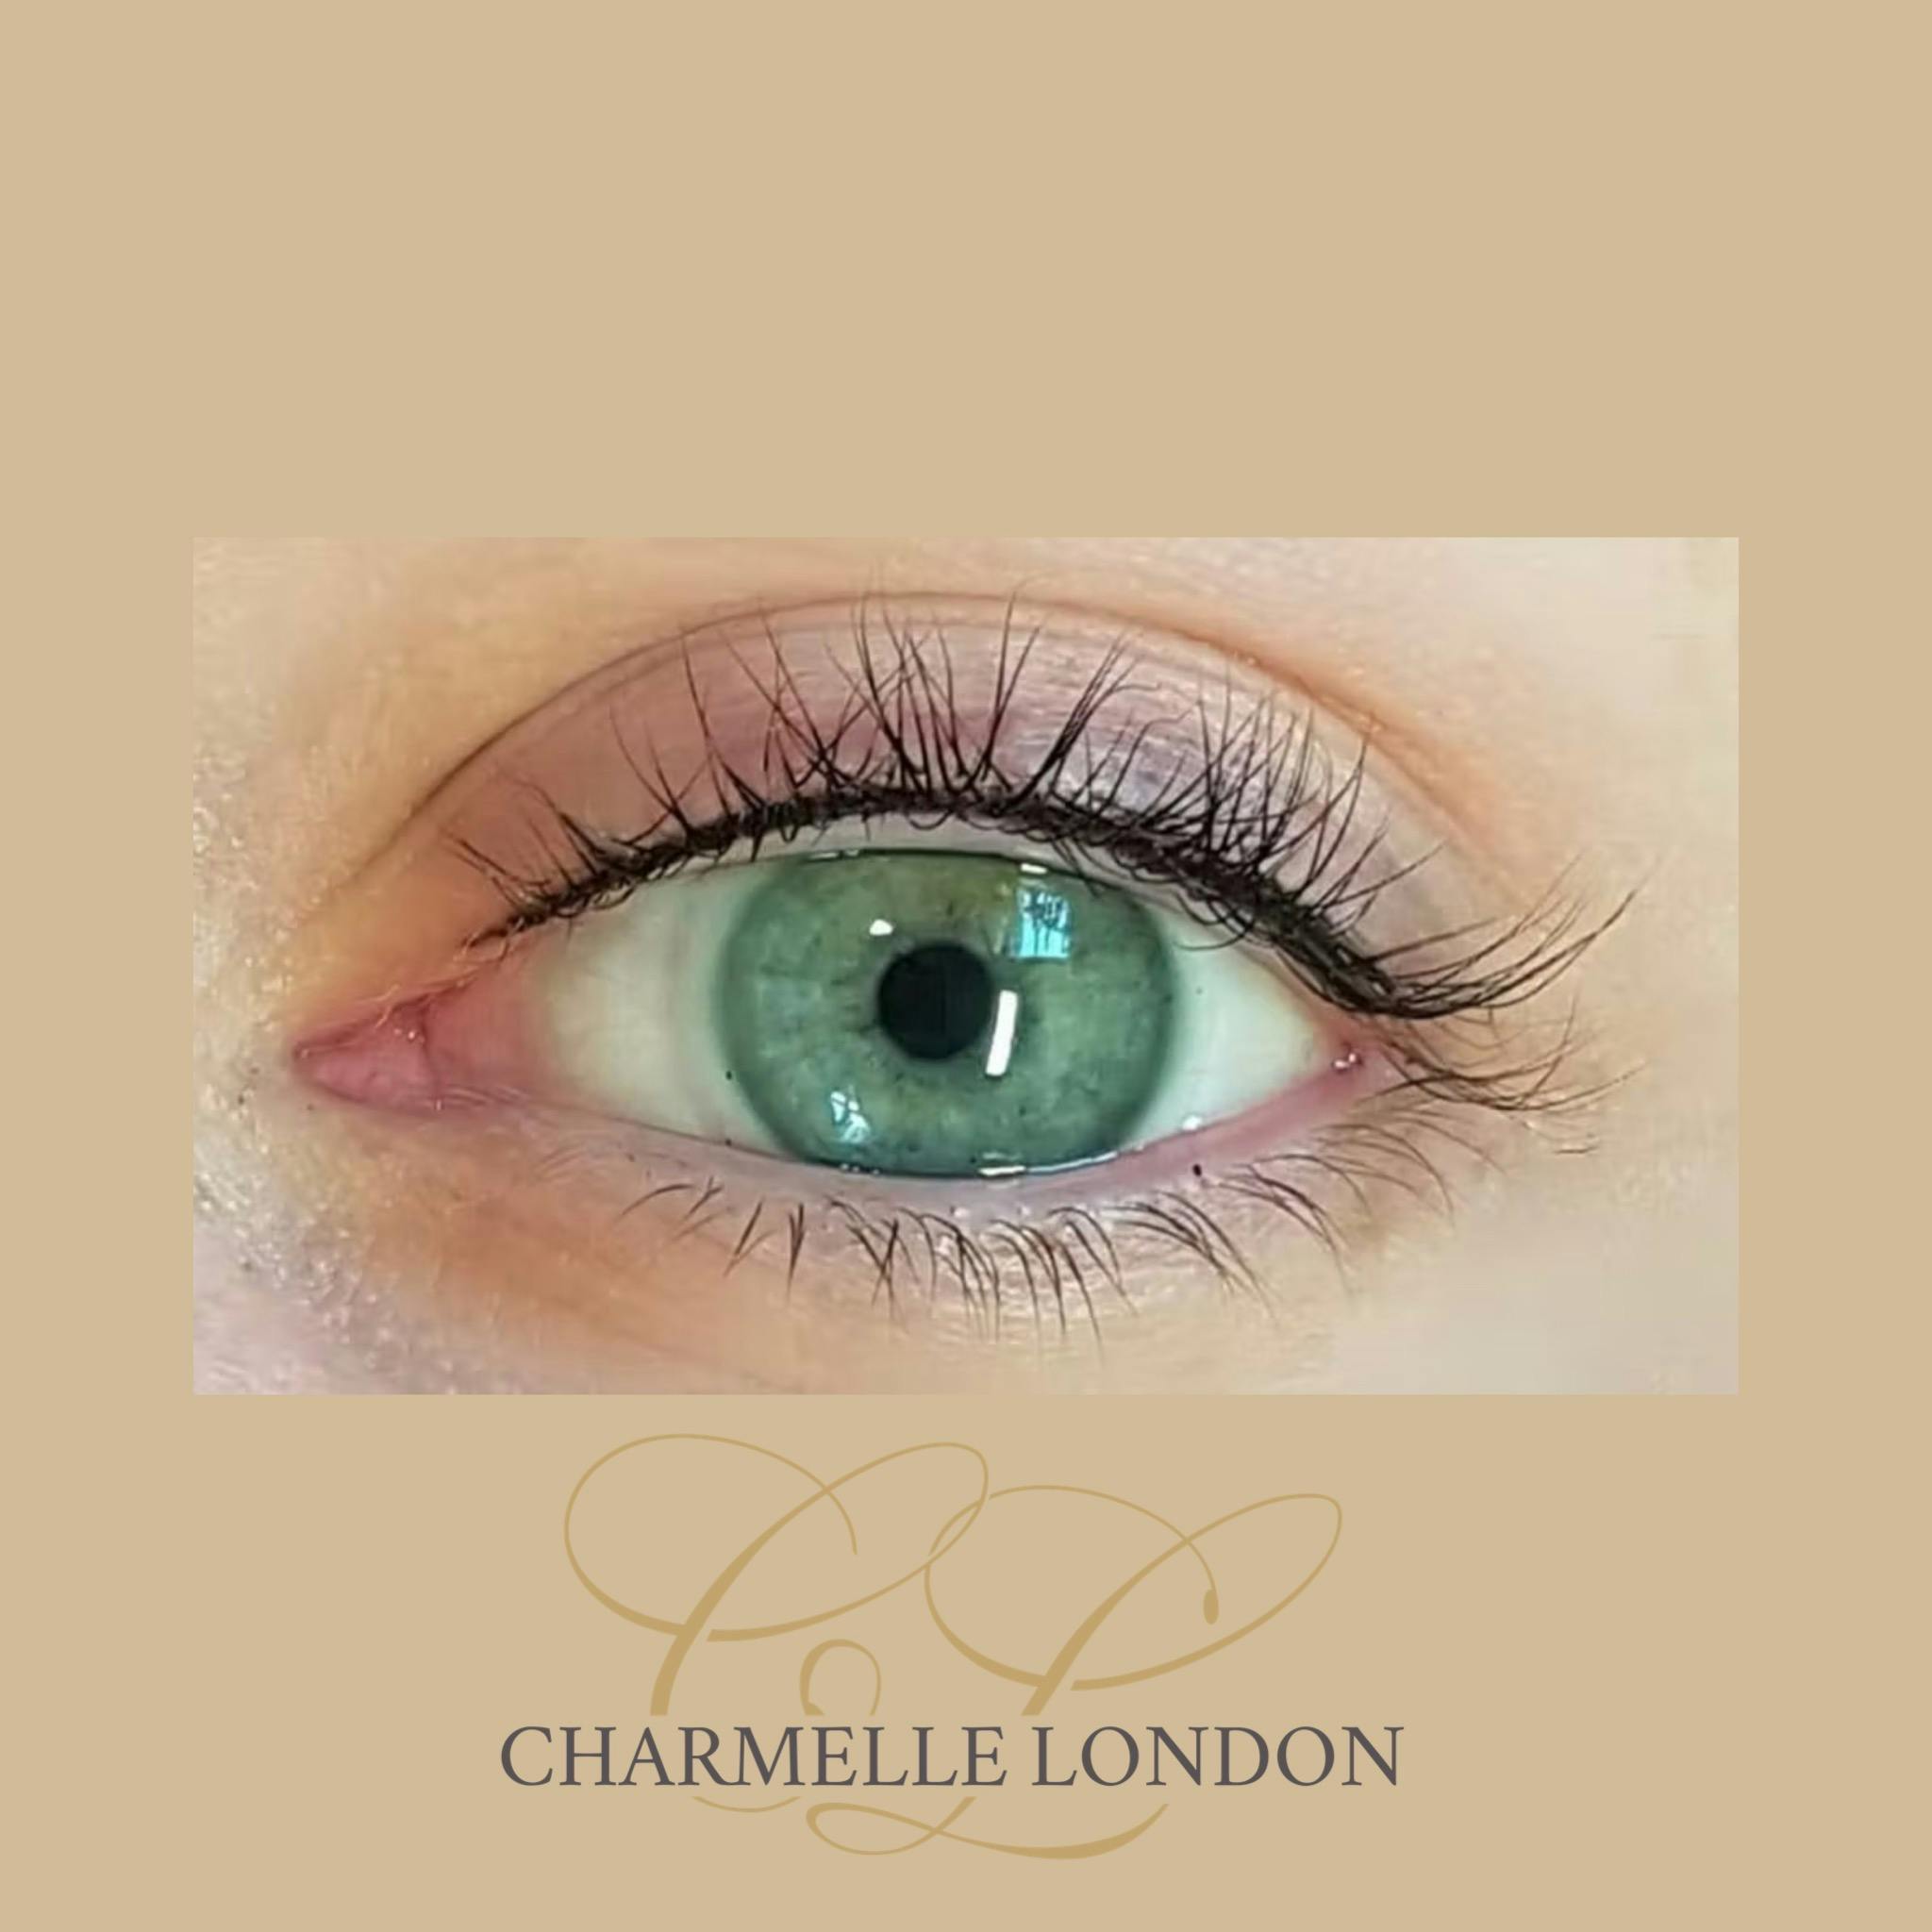 Eyelash Enhancement Create an illusion of darker, fuller lashes with a subtle eyelash enhancement. Call 0333 016 3500 to book today.